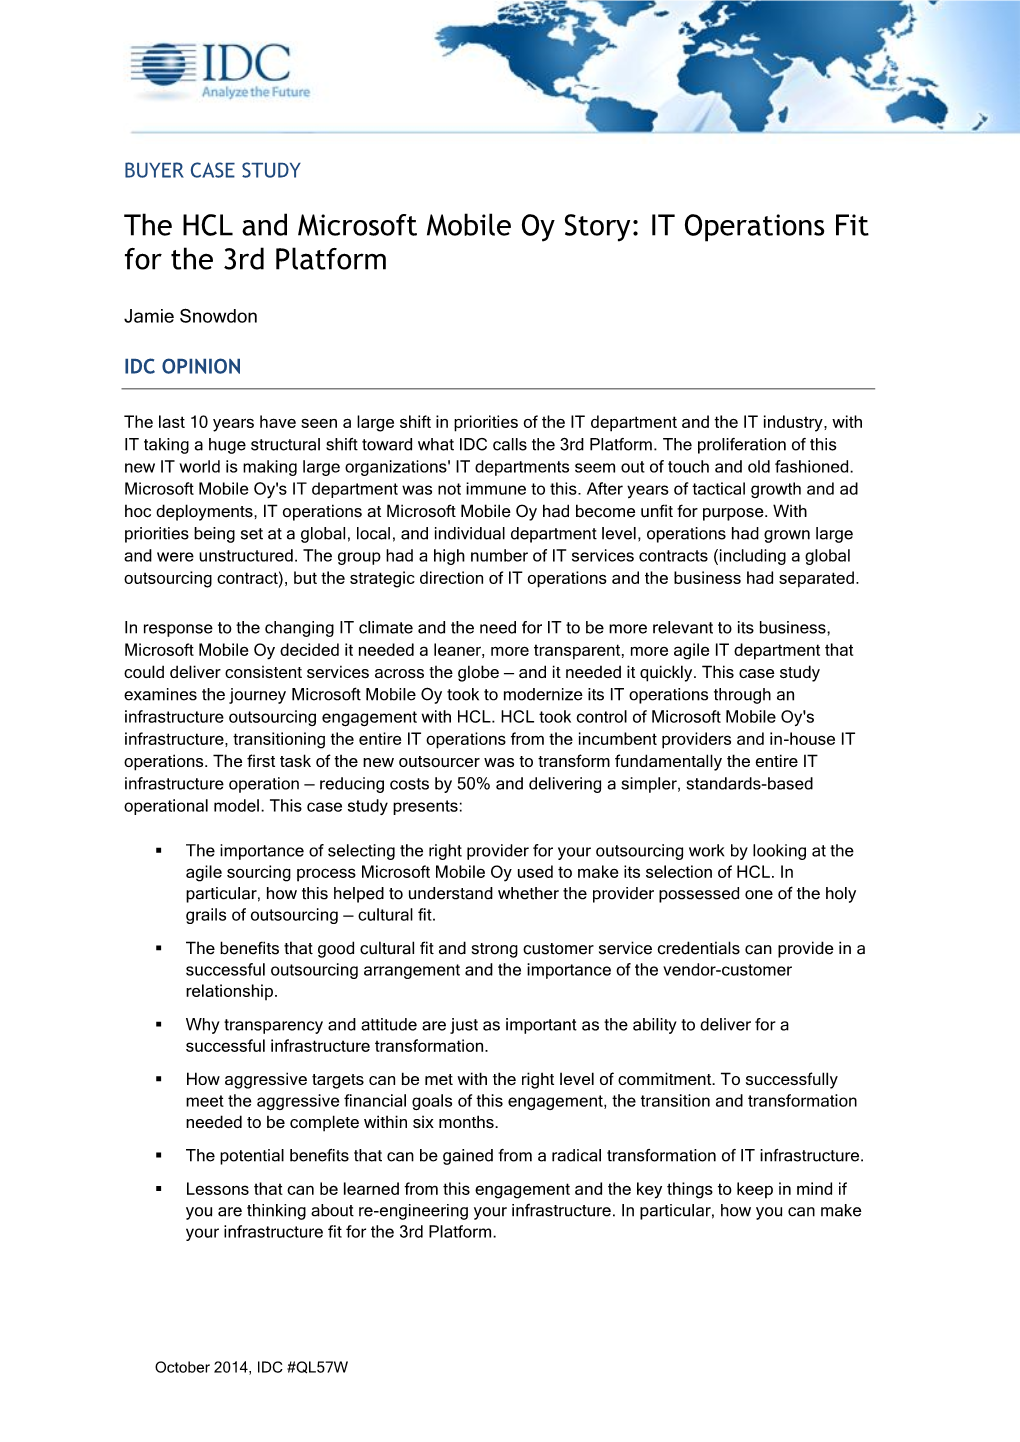 The HCL and Microsoft Mobile Oy Story: IT Operations Fit for the 3Rd Platform